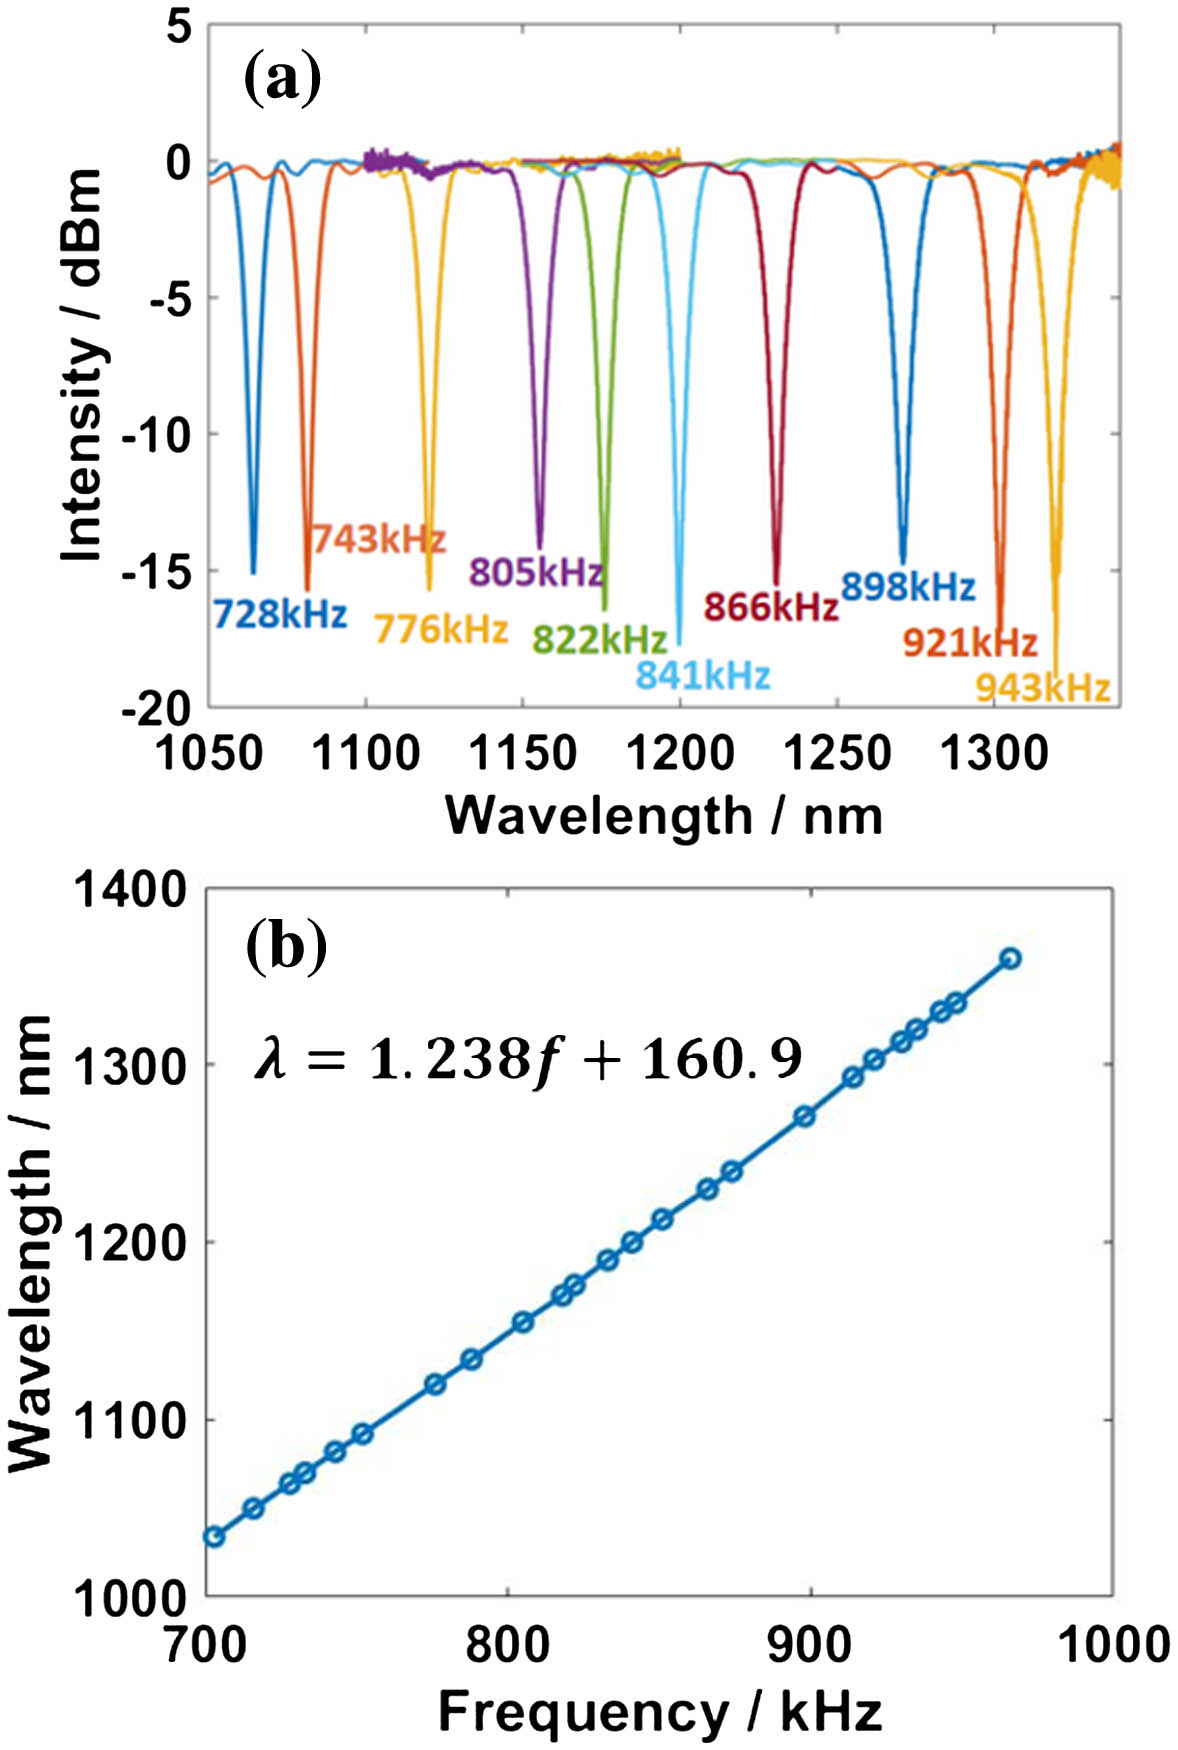 (a) Transmission spectrum of LP01 mode at different loaded frequencies; (b) fitted curve between eigenfrequency and wavelength.